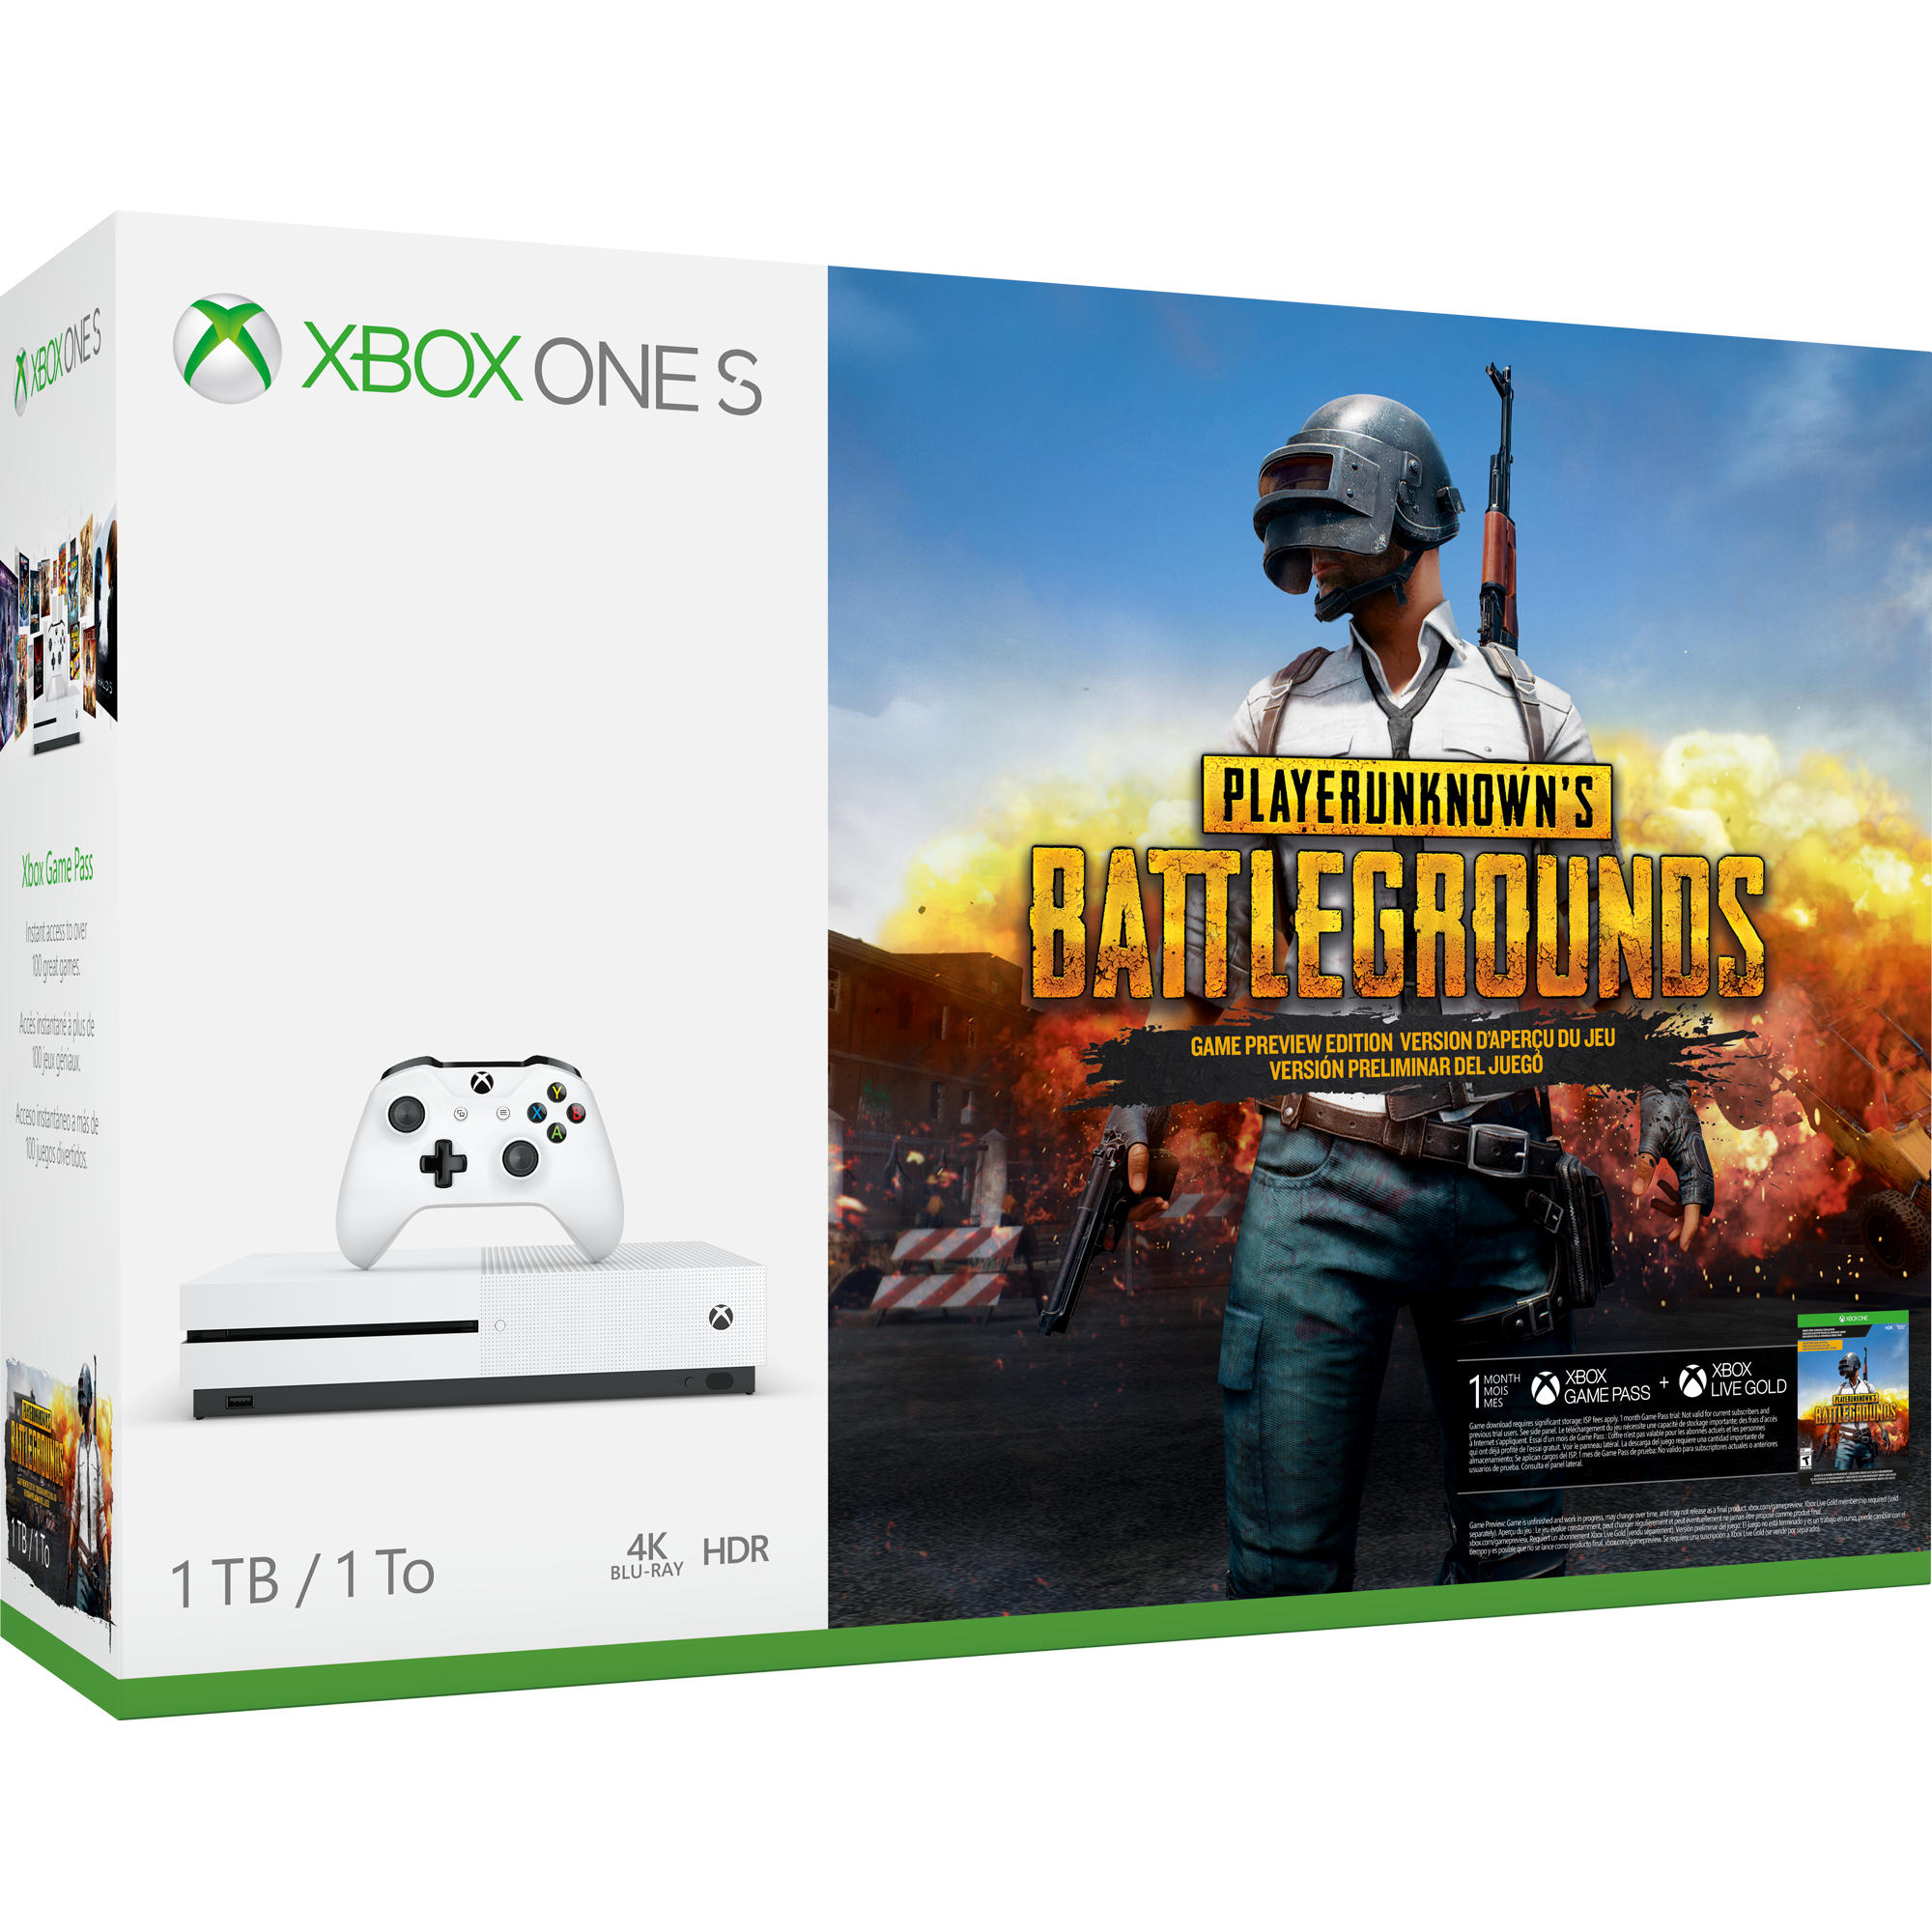 Join the Worldwide with One S PlayerUnknown's Battlegrounds Bundle - Xbox Wire